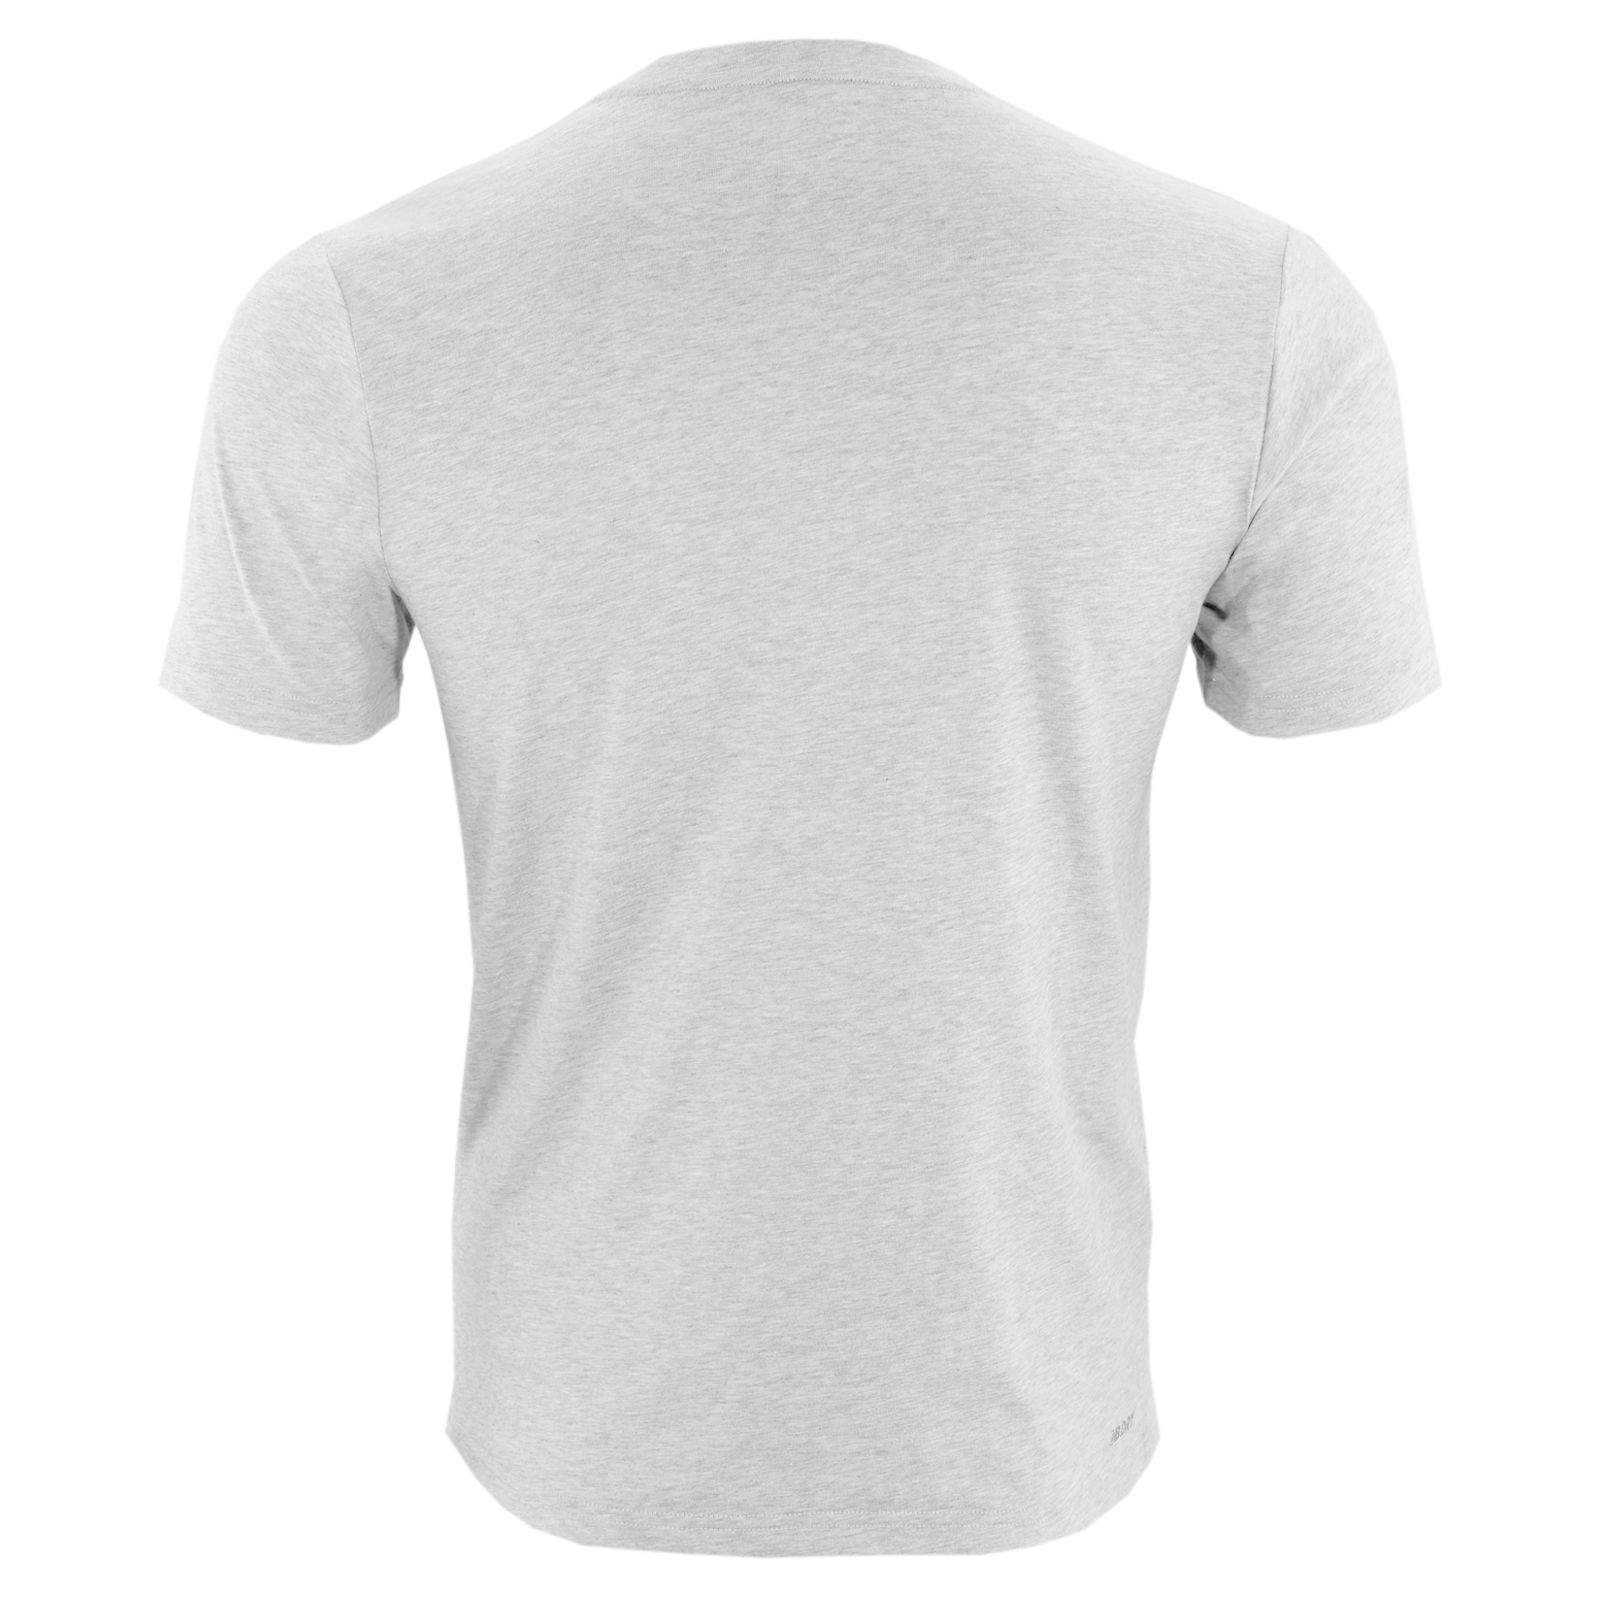 Heather Tech Tee, White image number 2